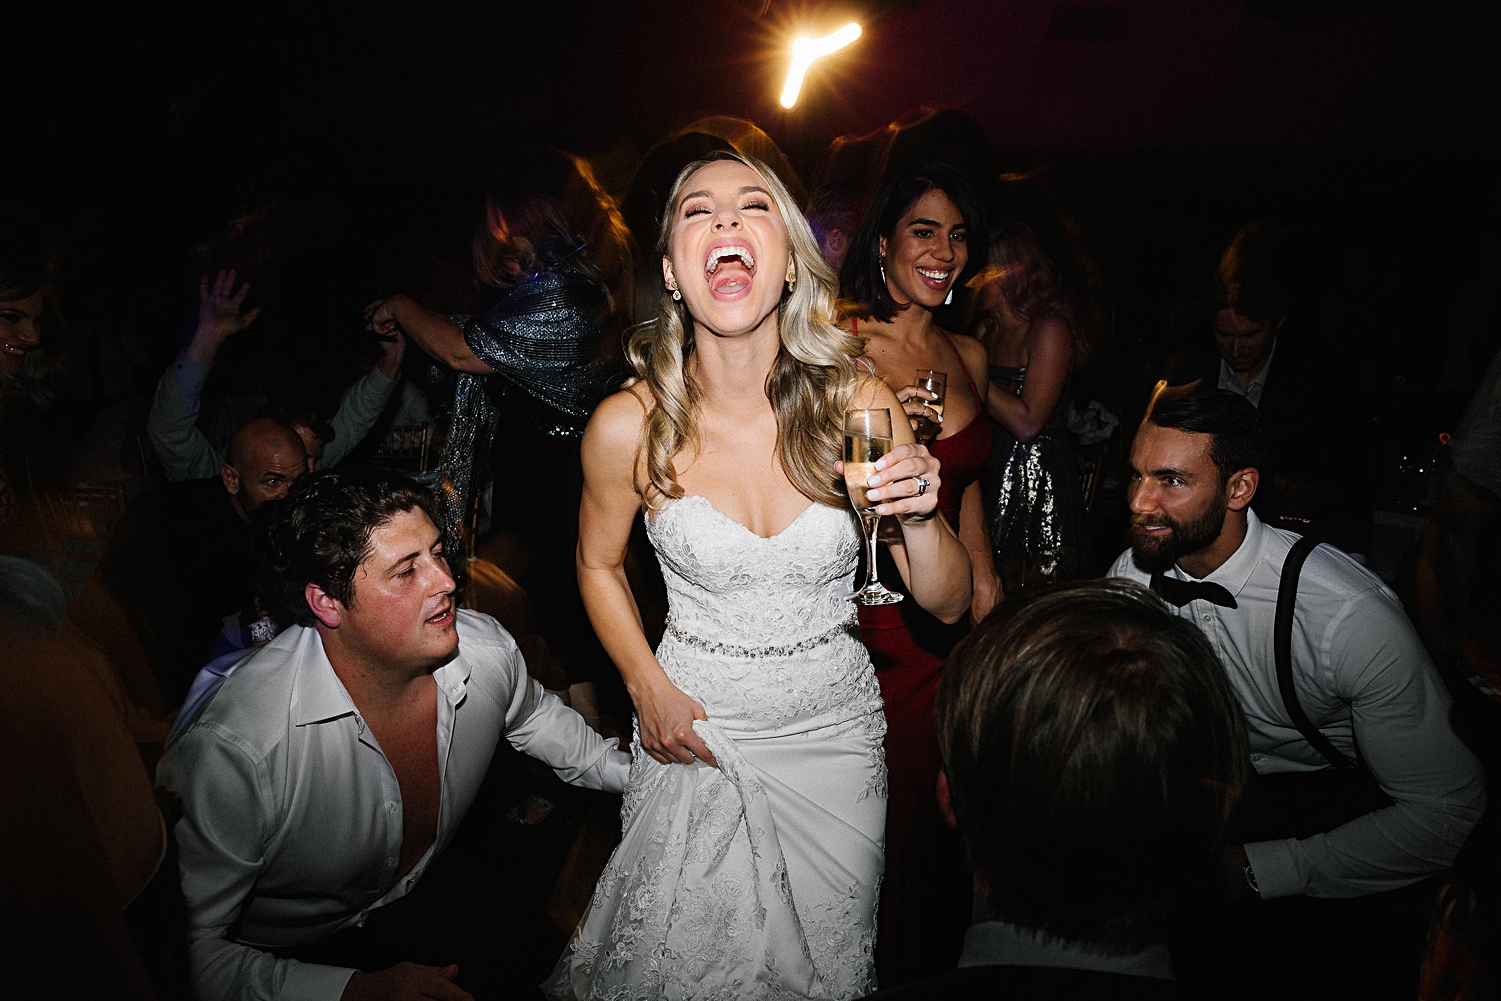 bride laughing while holding drink on dance floor wedding reception shutter drag